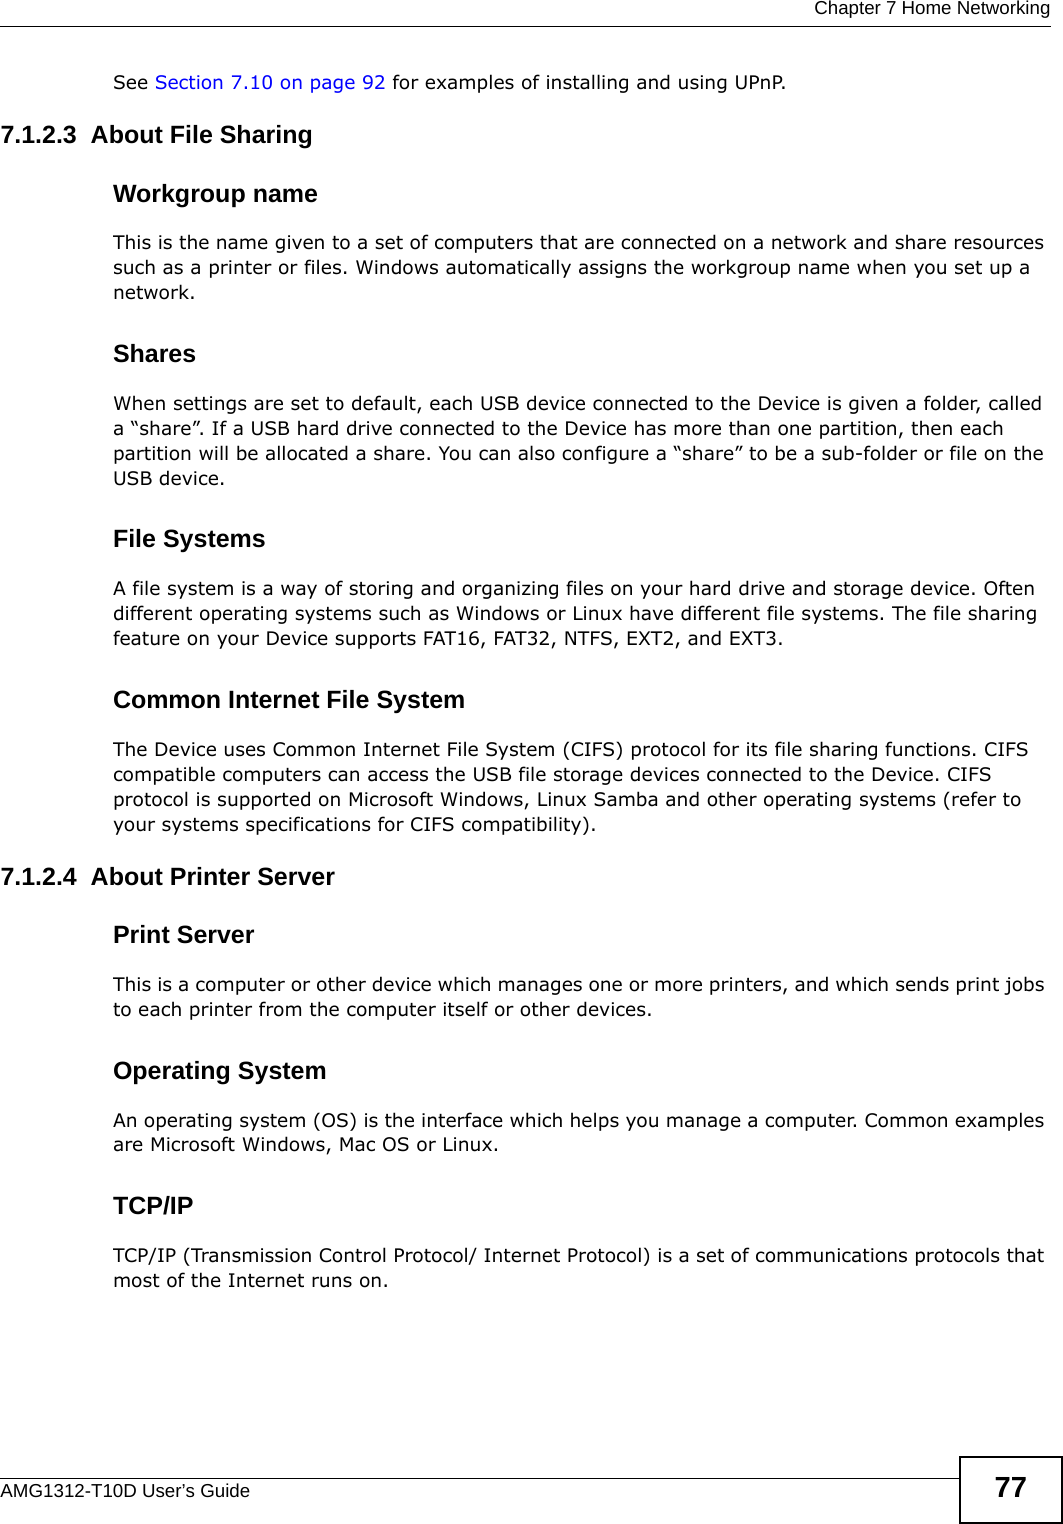  Chapter 7 Home NetworkingAMG1312-T10D User’s Guide 77See Section 7.10 on page 92 for examples of installing and using UPnP.7.1.2.3  About File SharingWorkgroup nameThis is the name given to a set of computers that are connected on a network and share resources such as a printer or files. Windows automatically assigns the workgroup name when you set up a network. SharesWhen settings are set to default, each USB device connected to the Device is given a folder, called a “share”. If a USB hard drive connected to the Device has more than one partition, then each partition will be allocated a share. You can also configure a “share” to be a sub-folder or file on the USB device.File SystemsA file system is a way of storing and organizing files on your hard drive and storage device. Often different operating systems such as Windows or Linux have different file systems. The file sharing feature on your Device supports FAT16, FAT32, NTFS, EXT2, and EXT3. Common Internet File SystemThe Device uses Common Internet File System (CIFS) protocol for its file sharing functions. CIFS compatible computers can access the USB file storage devices connected to the Device. CIFS protocol is supported on Microsoft Windows, Linux Samba and other operating systems (refer to your systems specifications for CIFS compatibility). 7.1.2.4  About Printer ServerPrint ServerThis is a computer or other device which manages one or more printers, and which sends print jobs to each printer from the computer itself or other devices.Operating SystemAn operating system (OS) is the interface which helps you manage a computer. Common examples are Microsoft Windows, Mac OS or Linux.TCP/IPTCP/IP (Transmission Control Protocol/ Internet Protocol) is a set of communications protocols that most of the Internet runs on.   